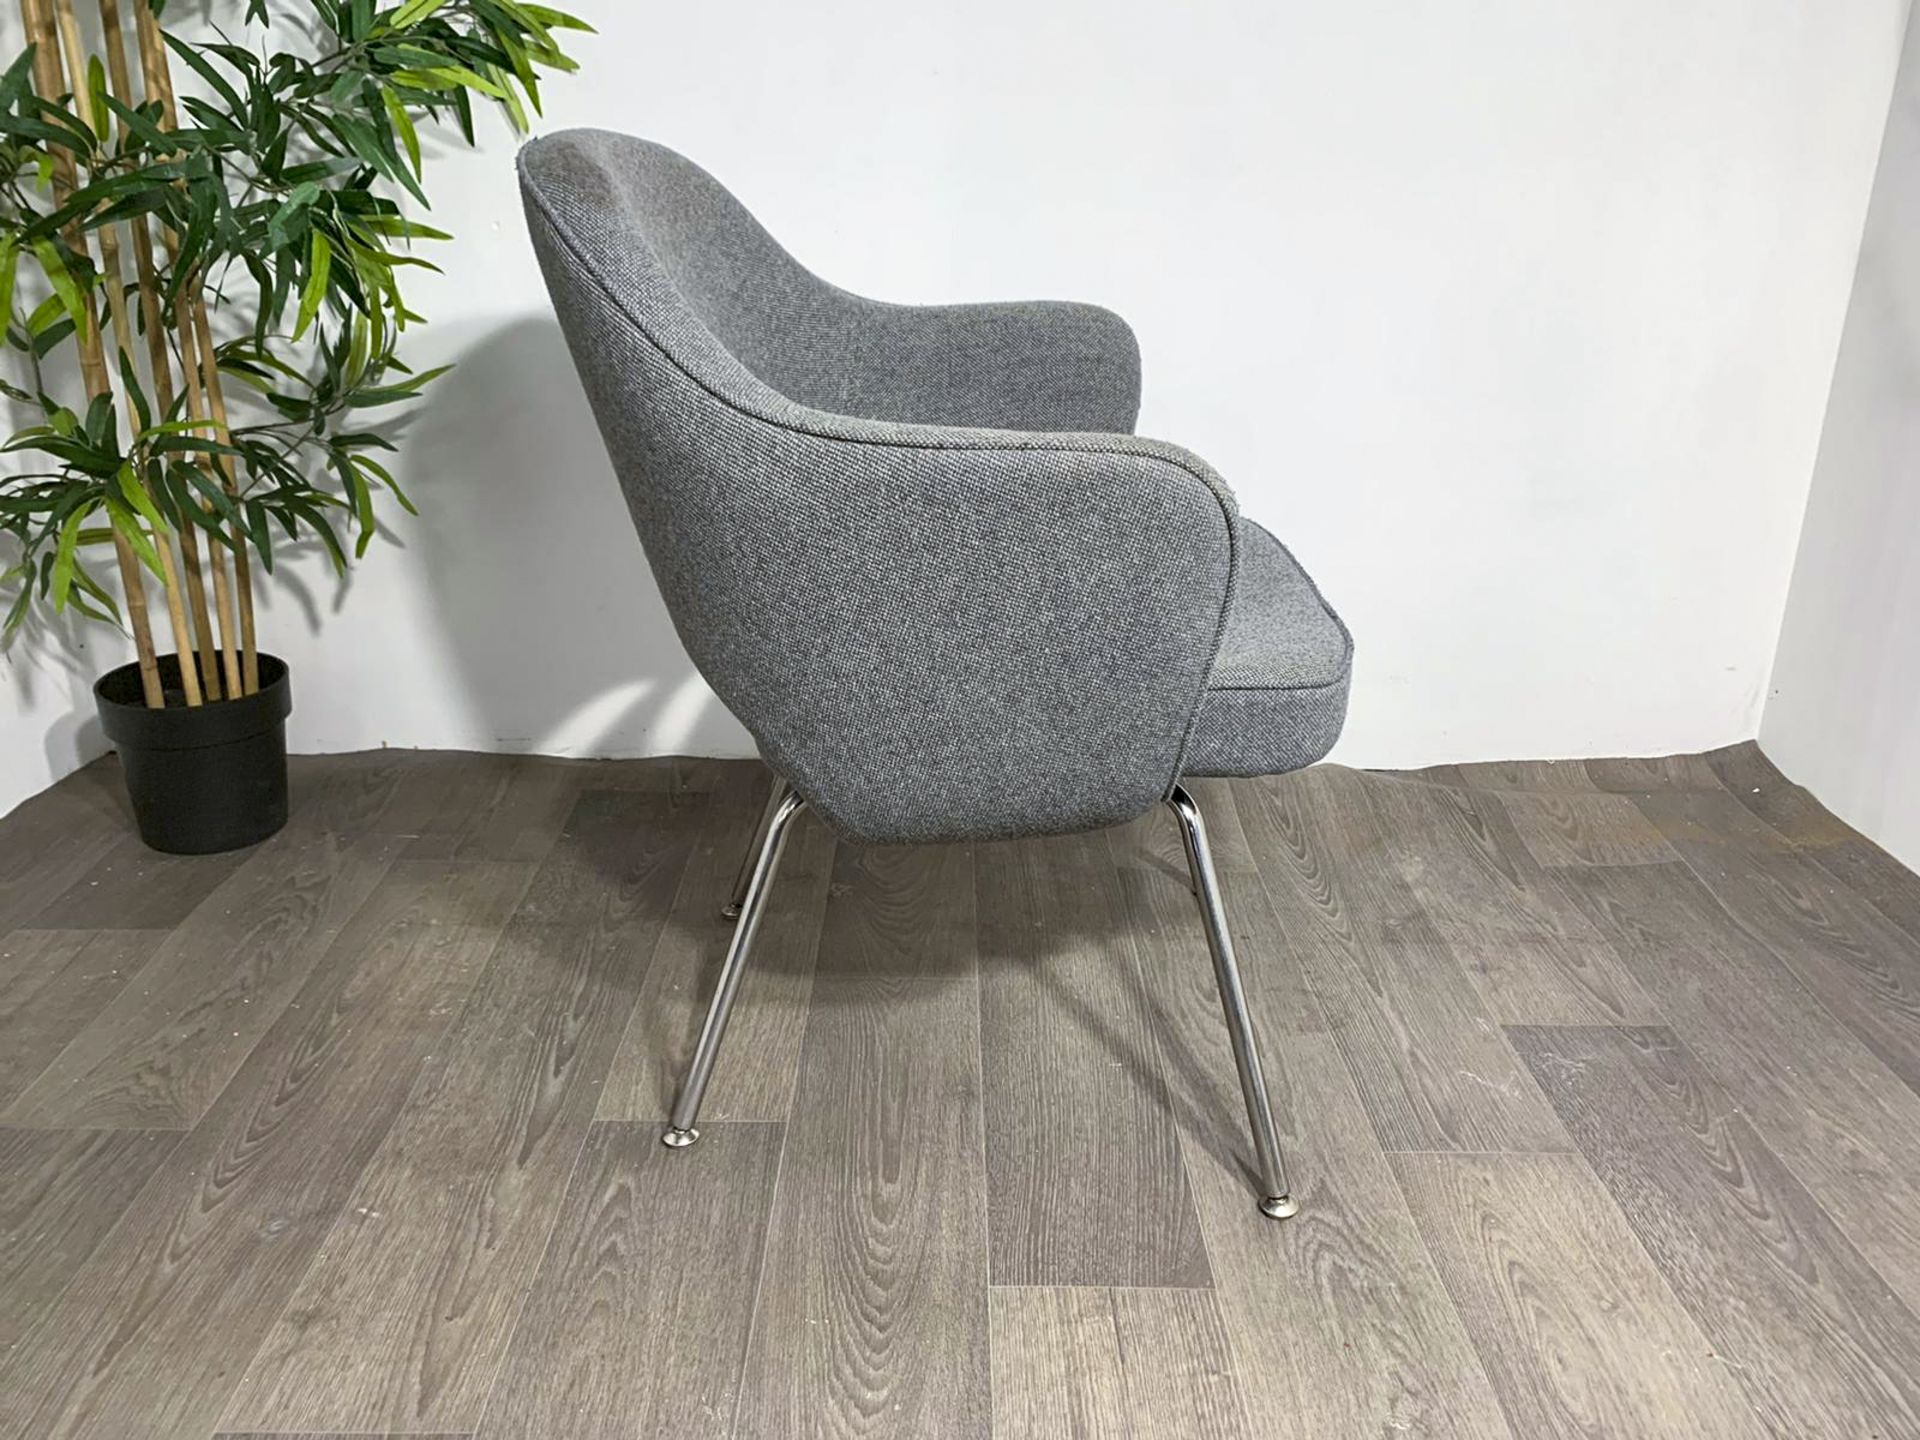 Grey Fabric Commercial Grade Chair with Chrome Legs x2 - Image 3 of 9